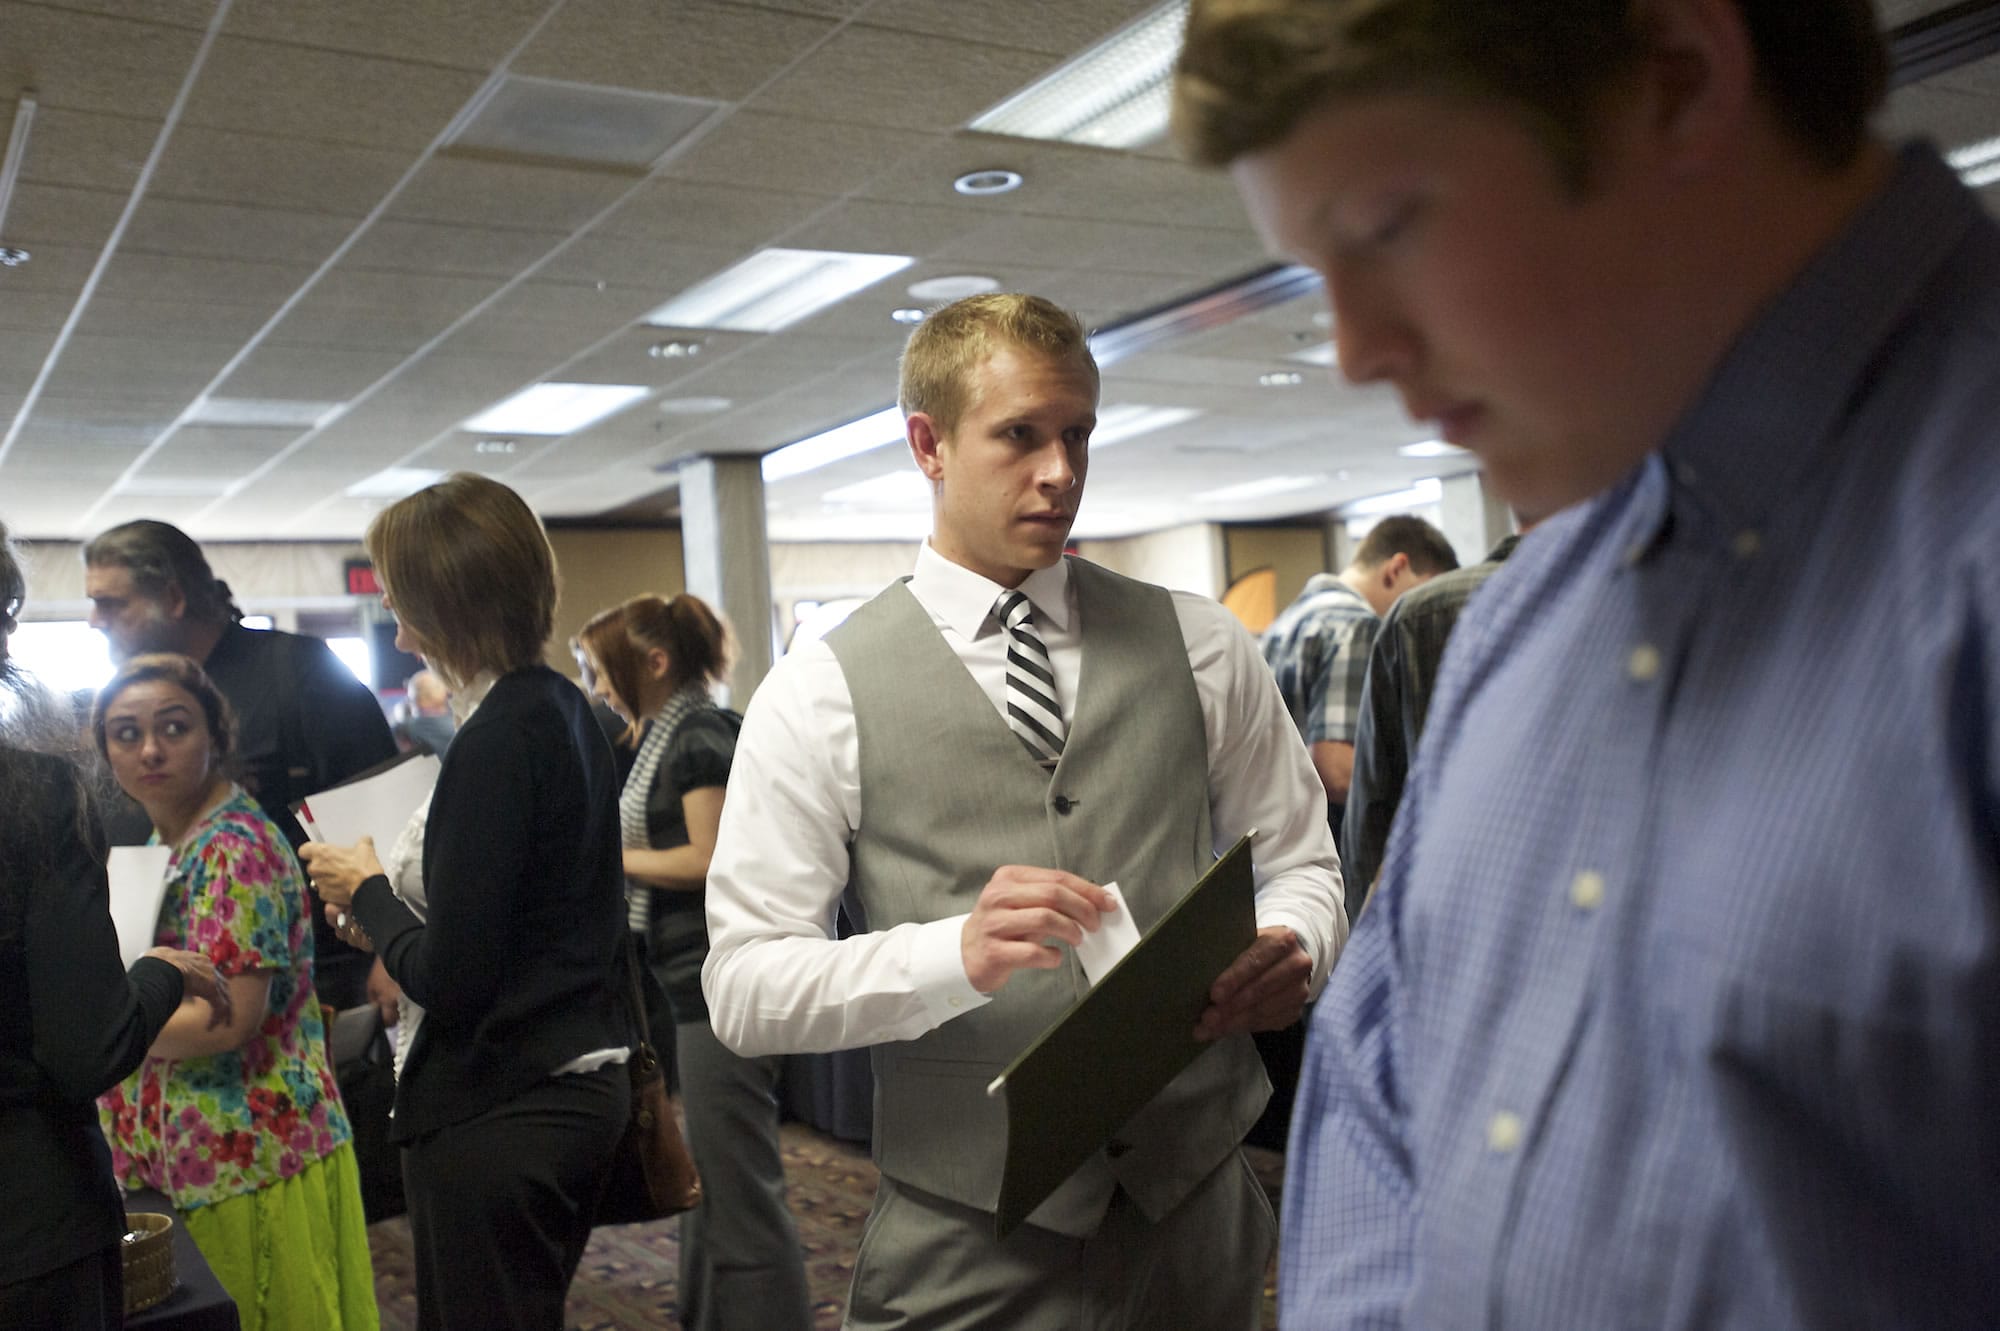 Braden Lewallen, 22, of Camas, who graduated from Washington State University with a political science degree, gets in line to talk to recruiters at a job fair hosted by Rep. Jamie Herrera Beutler at the Red Lion at the Quay on June 10.